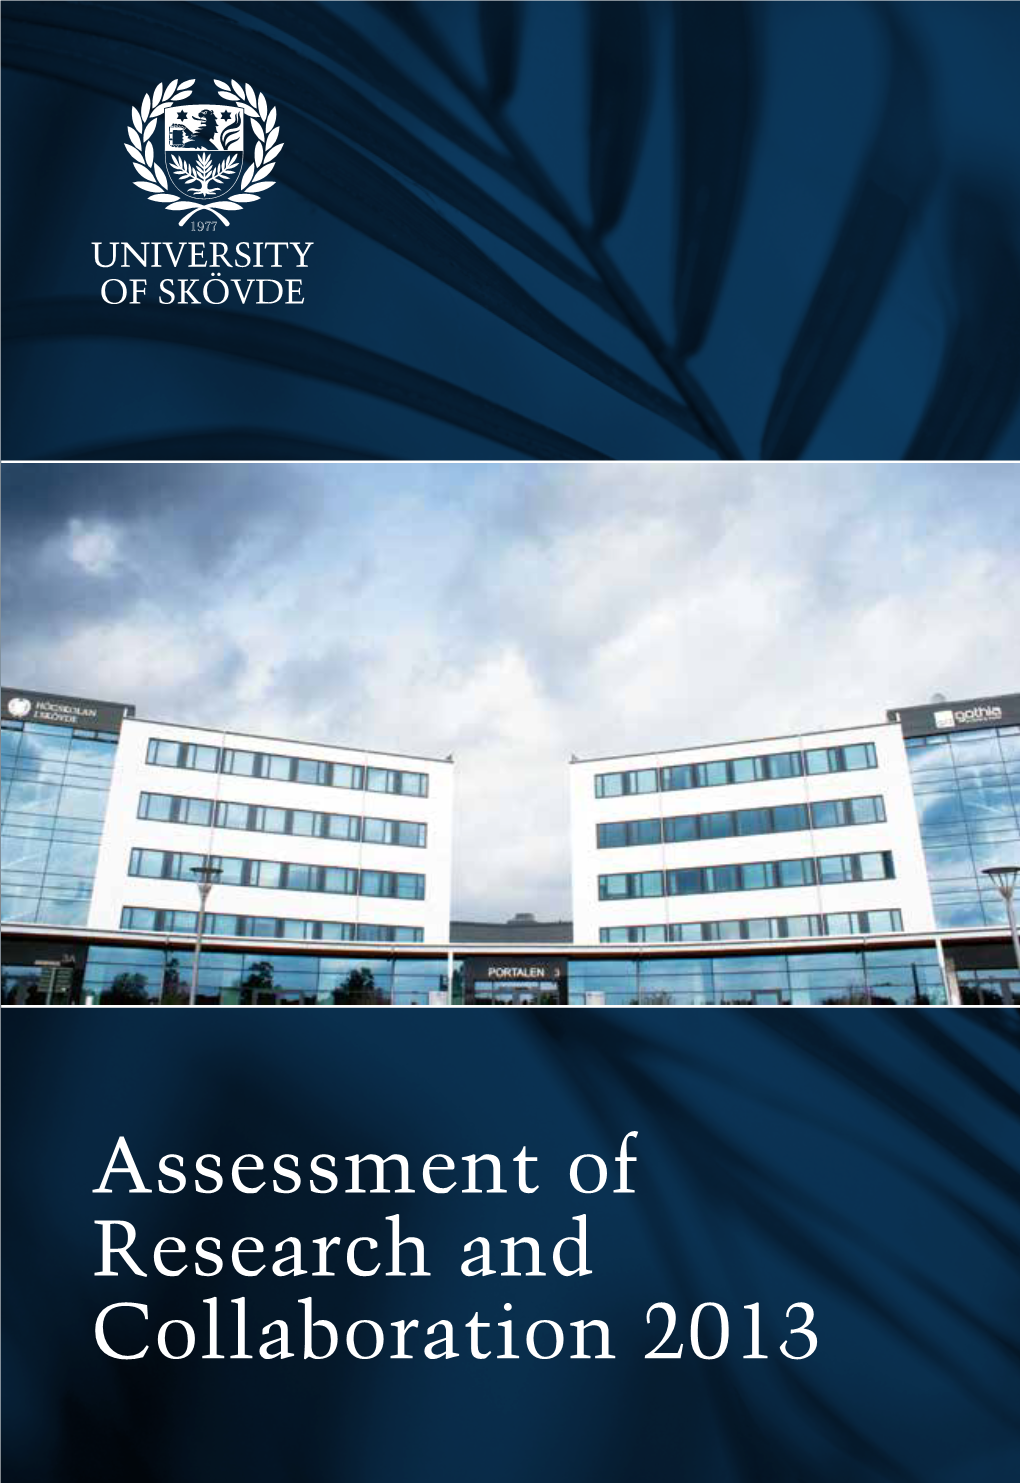 Assessment of Research and Collaboration 2013